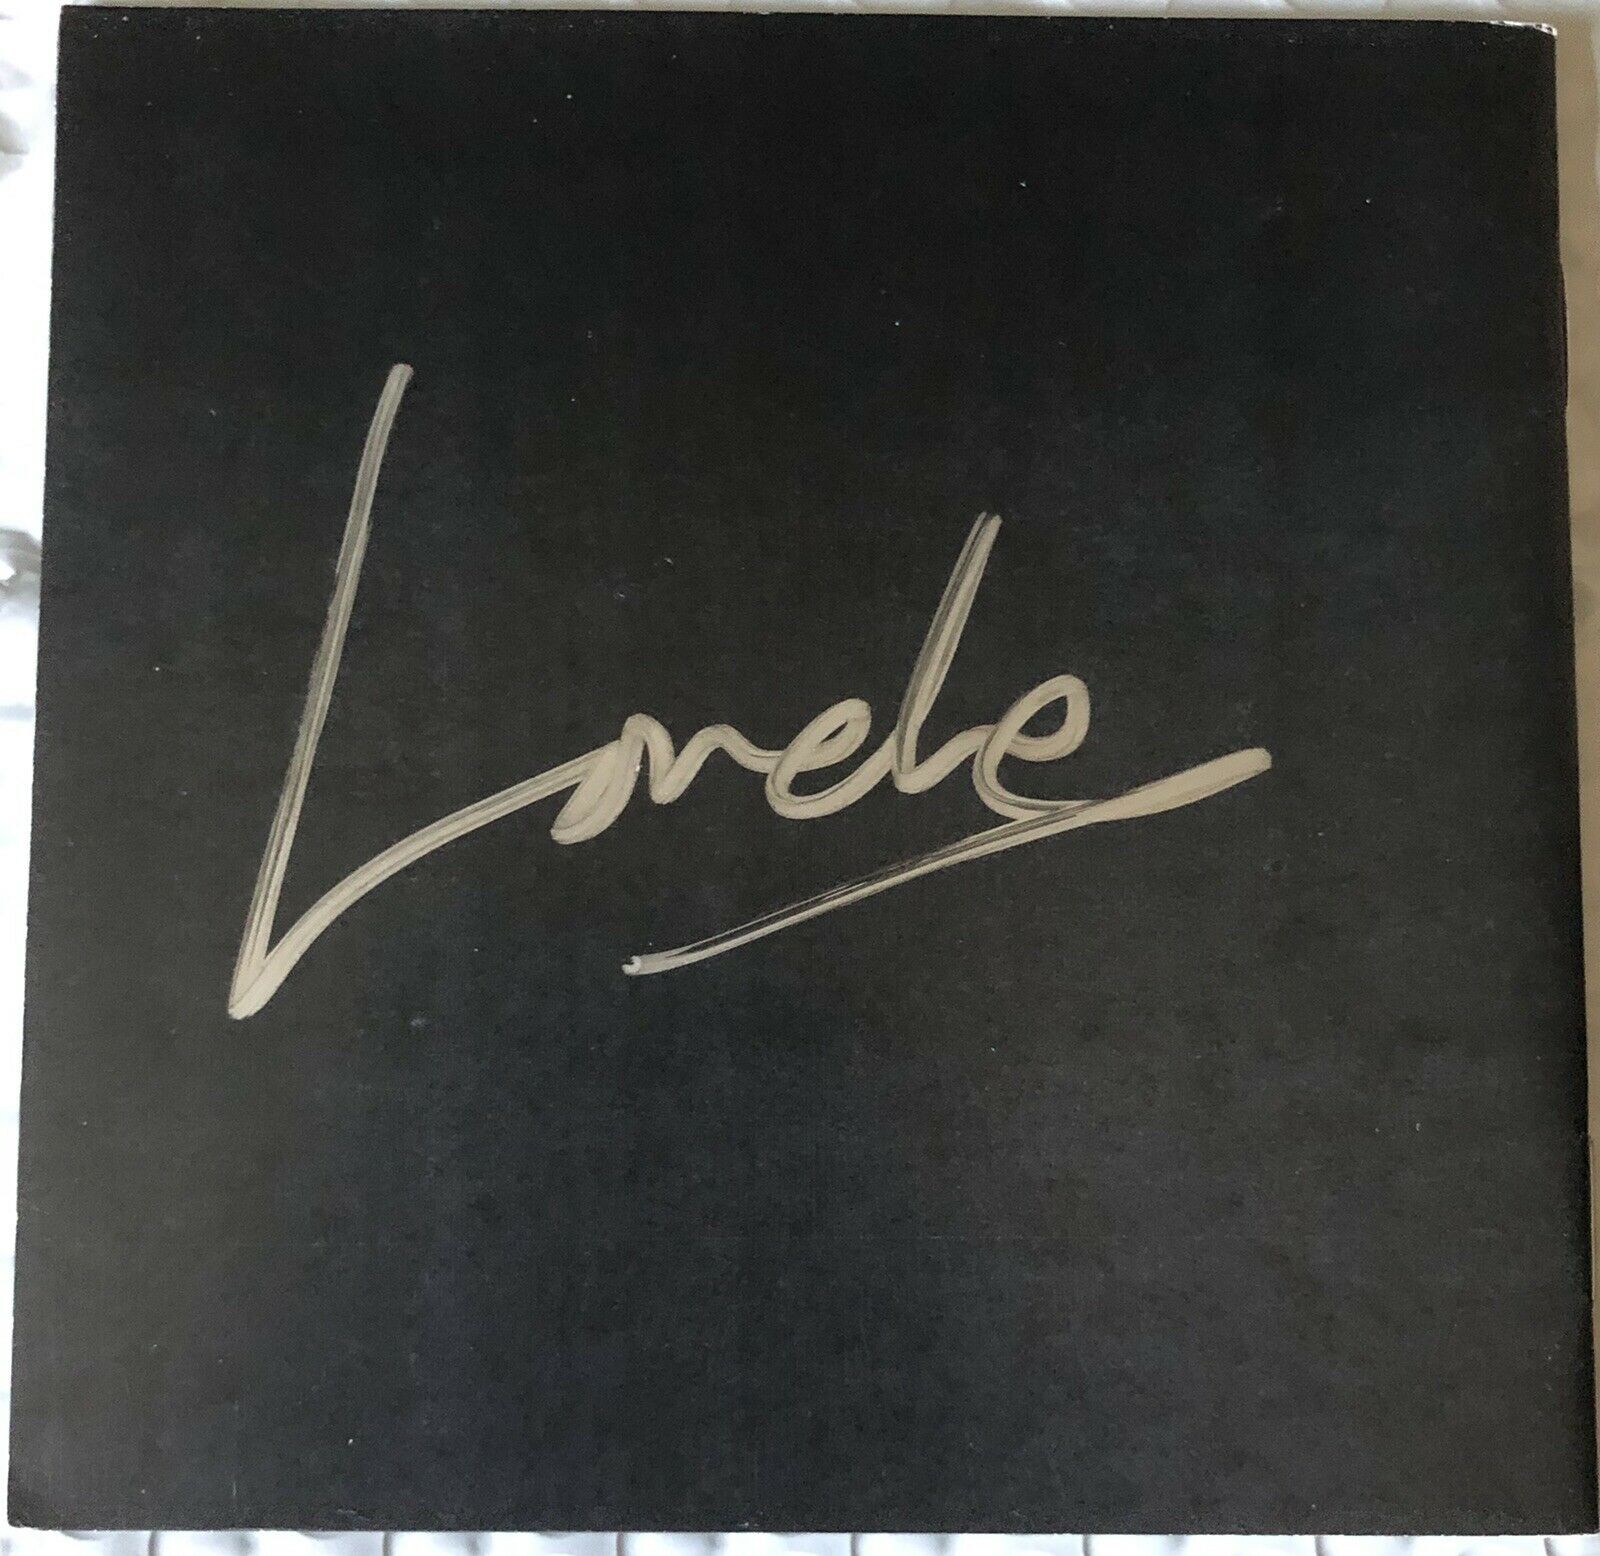 Lorde Autographed CD